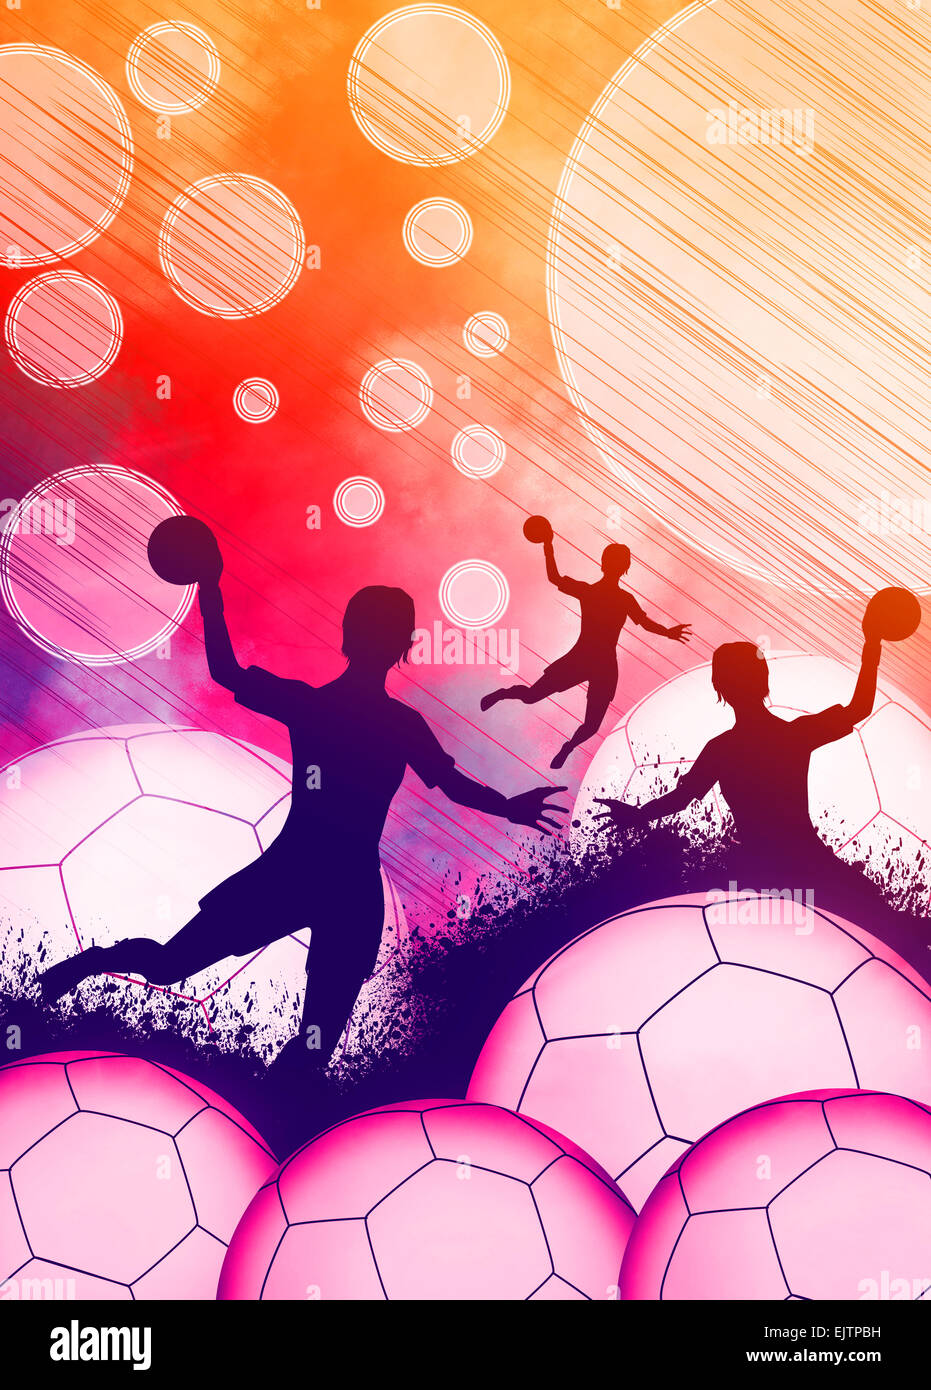 Handball girl match invitation poster or flyer background with space Stock  Photo - Alamy